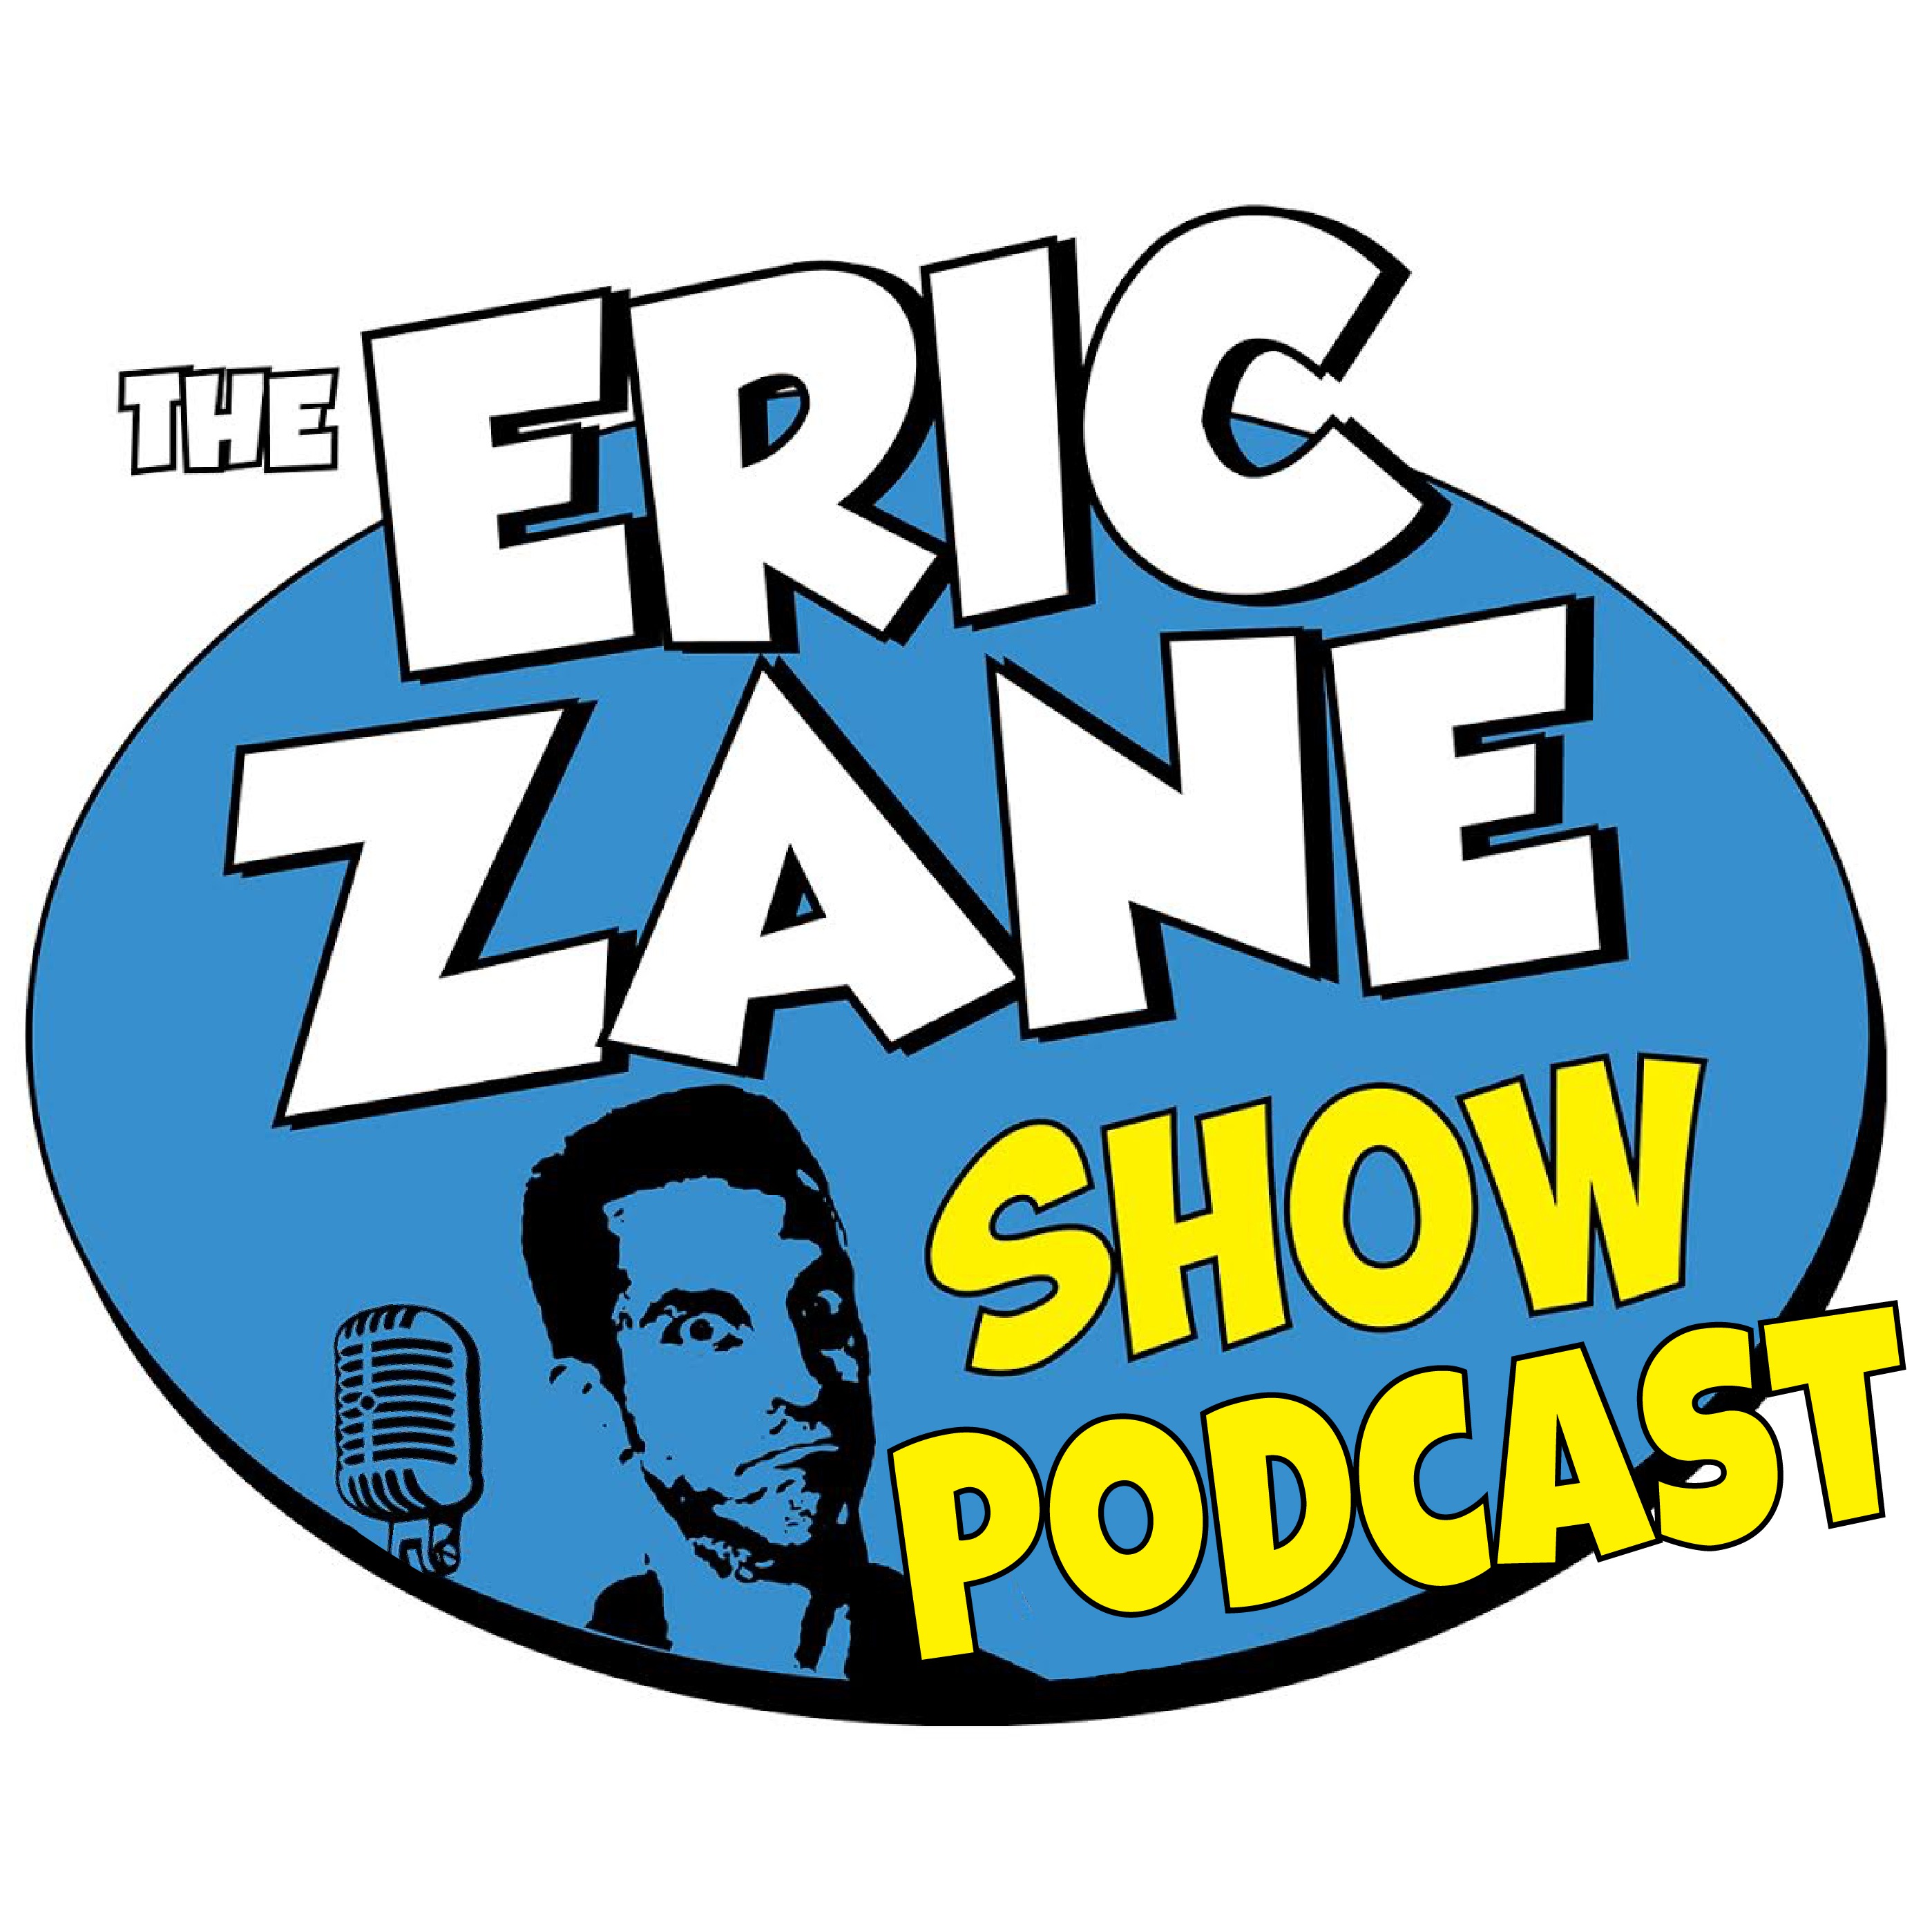 Best of the Eric Zane Show Podcast 5/30/22